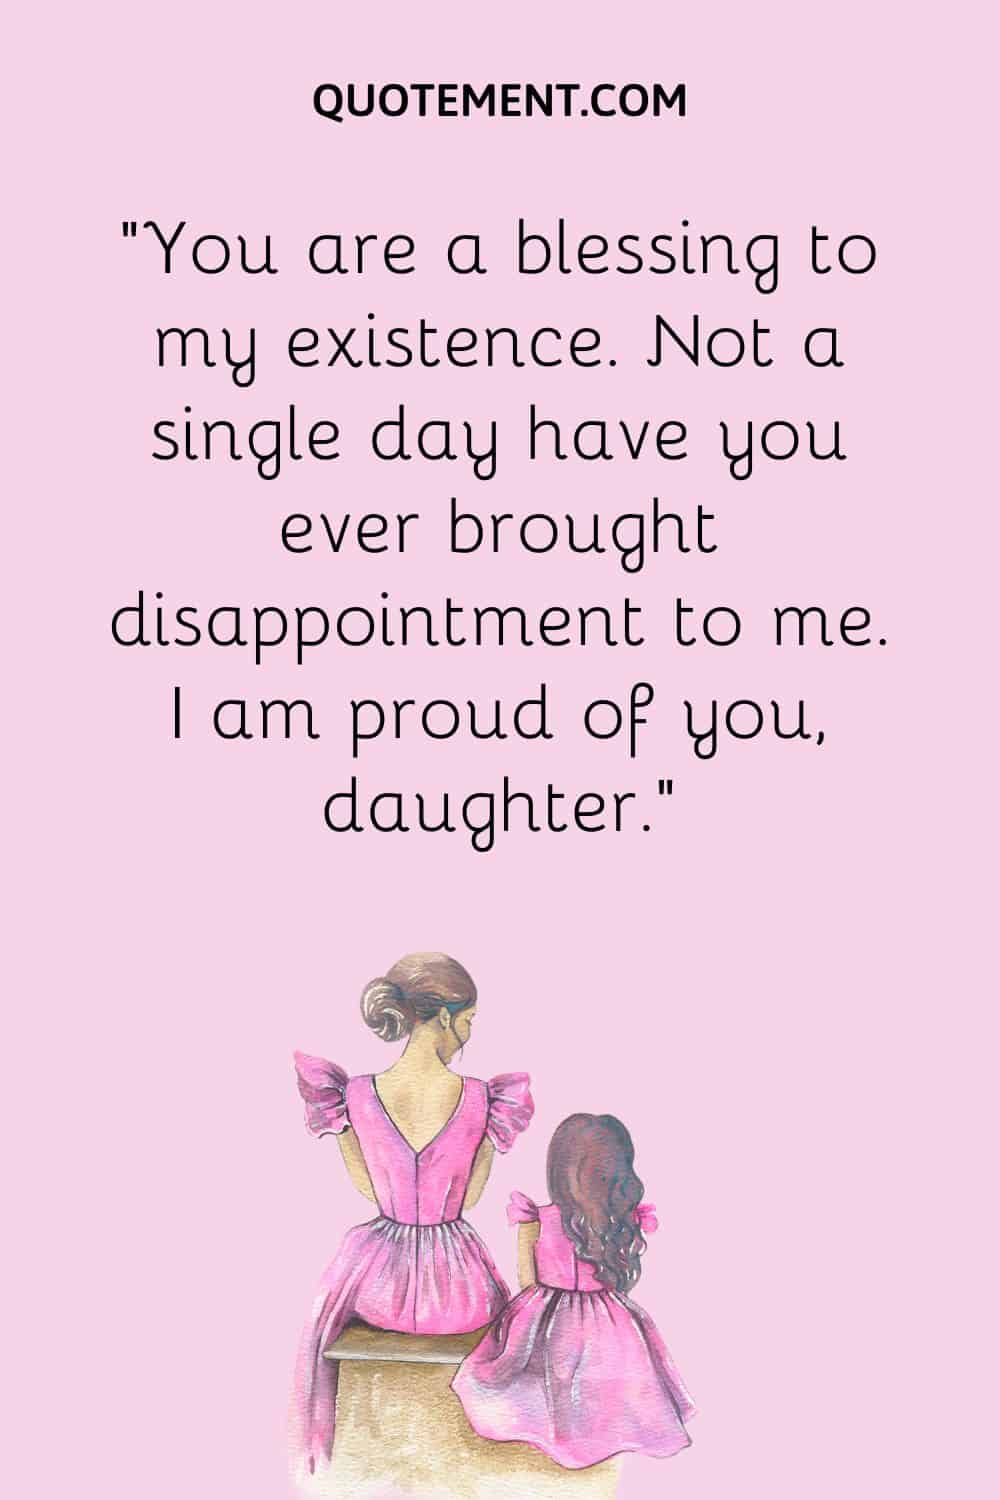 “You are a blessing to my existence. Not a single day have you ever brought disappointment to me. I am proud of you, daughter.”